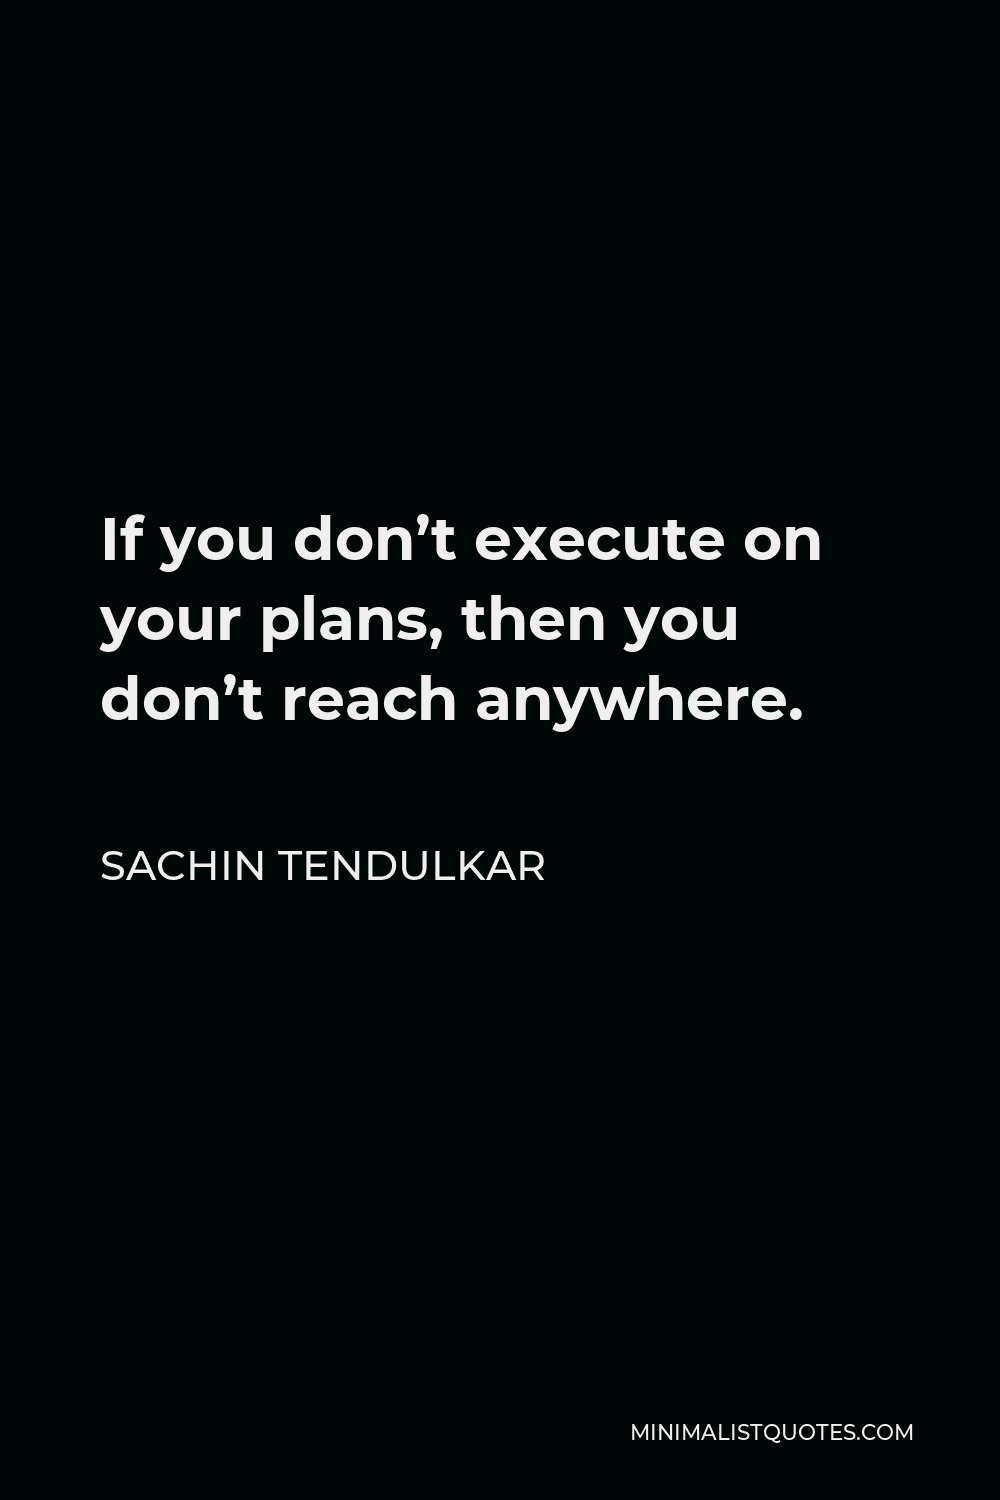 Sachin Tendulkar Quote - If you don’t execute on your plans, then you don’t reach anywhere.